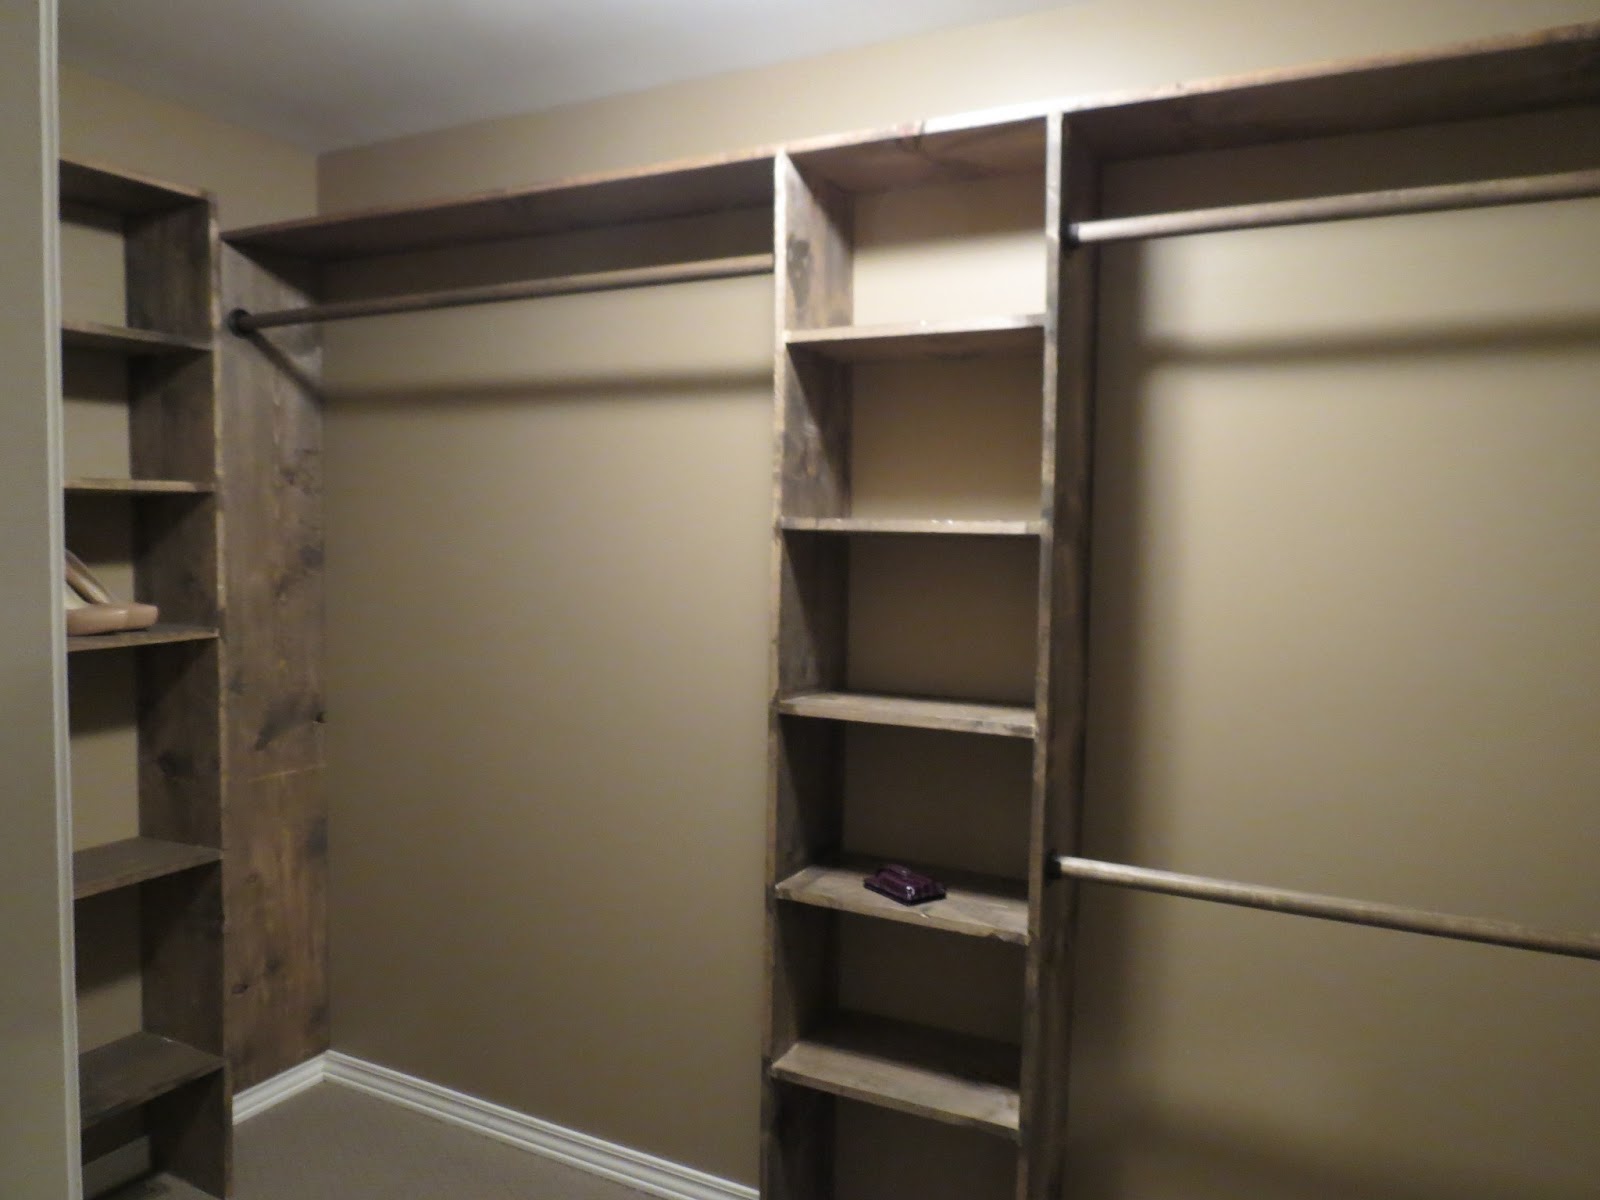 Let's Just Build a House!: Walk-in closets: No more living ...